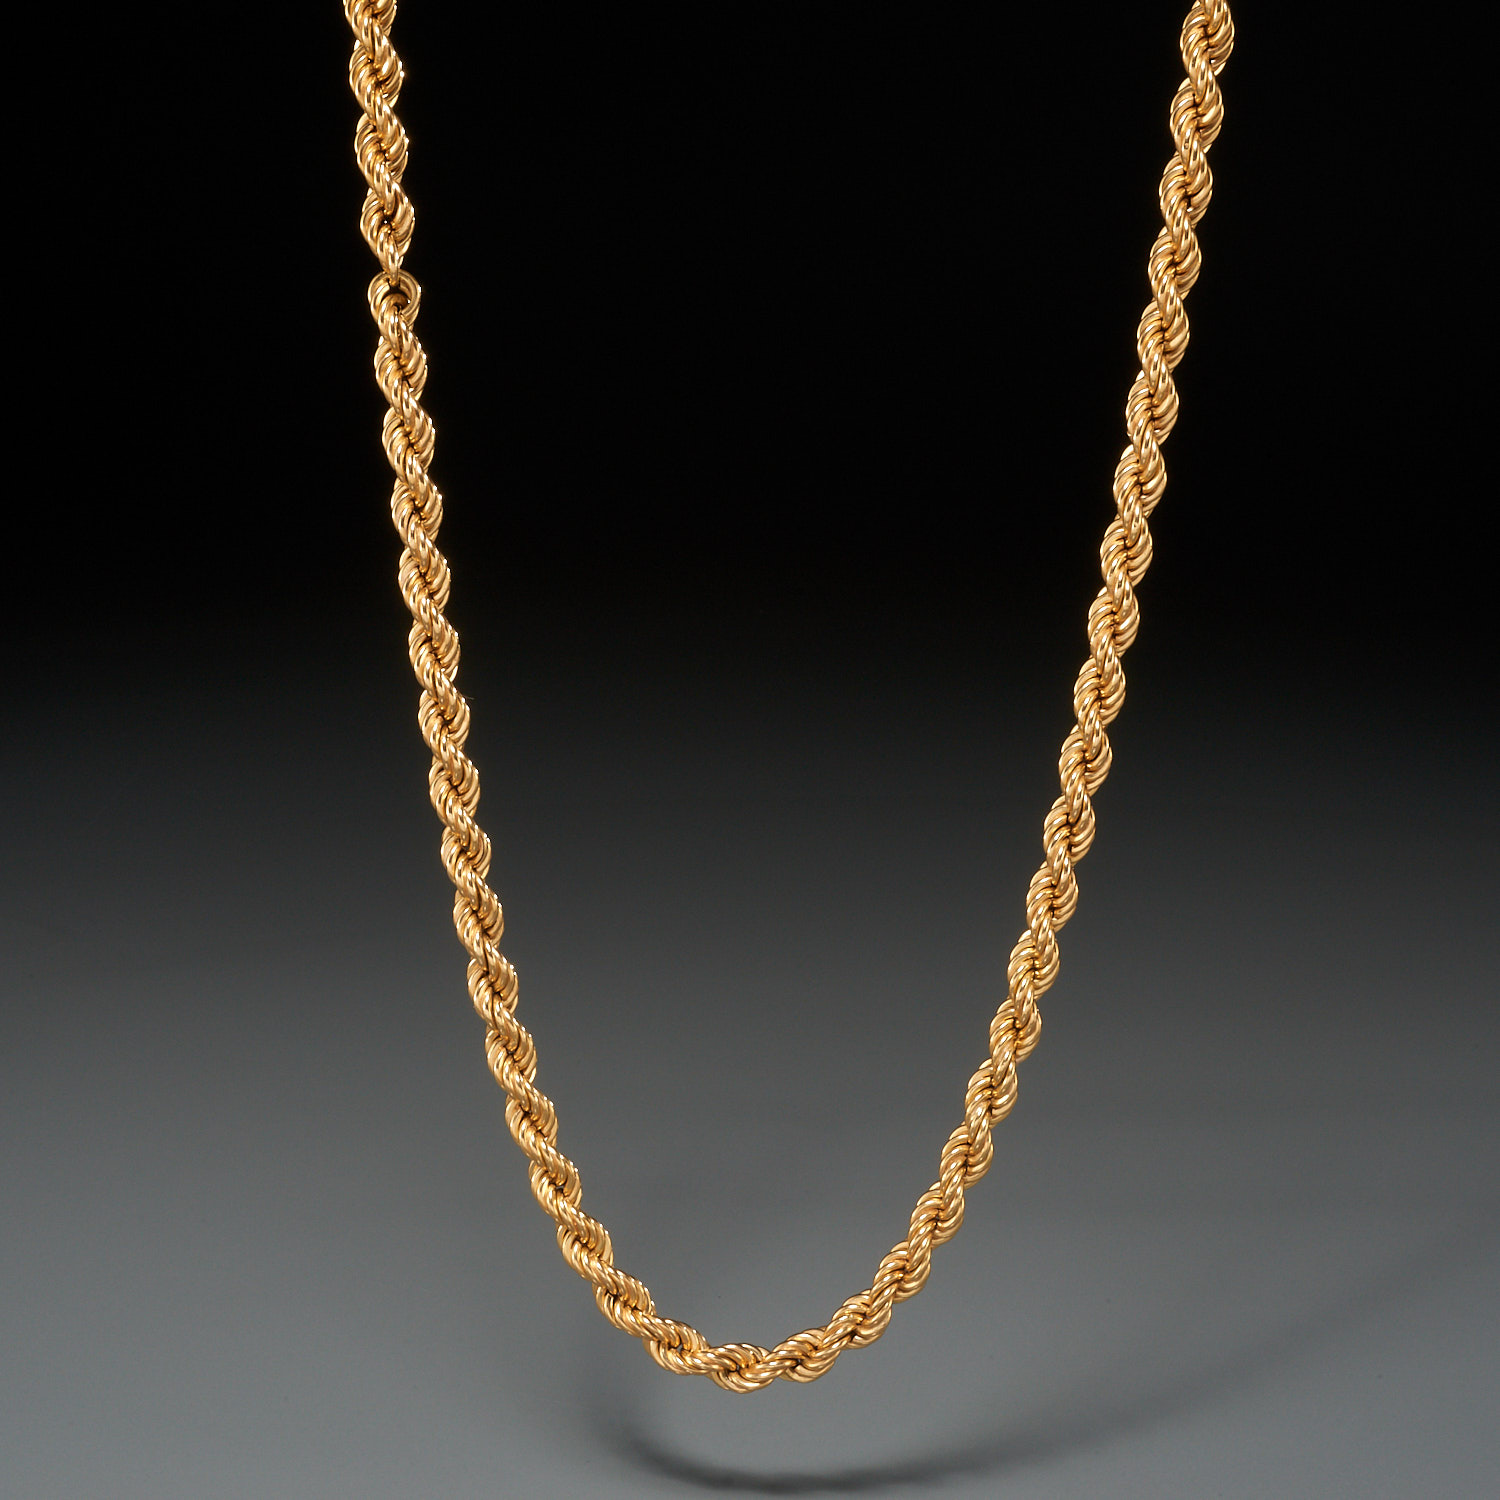 ITALIAN 18K GOLD ROPE CHAIN NECKLACE 3626a5